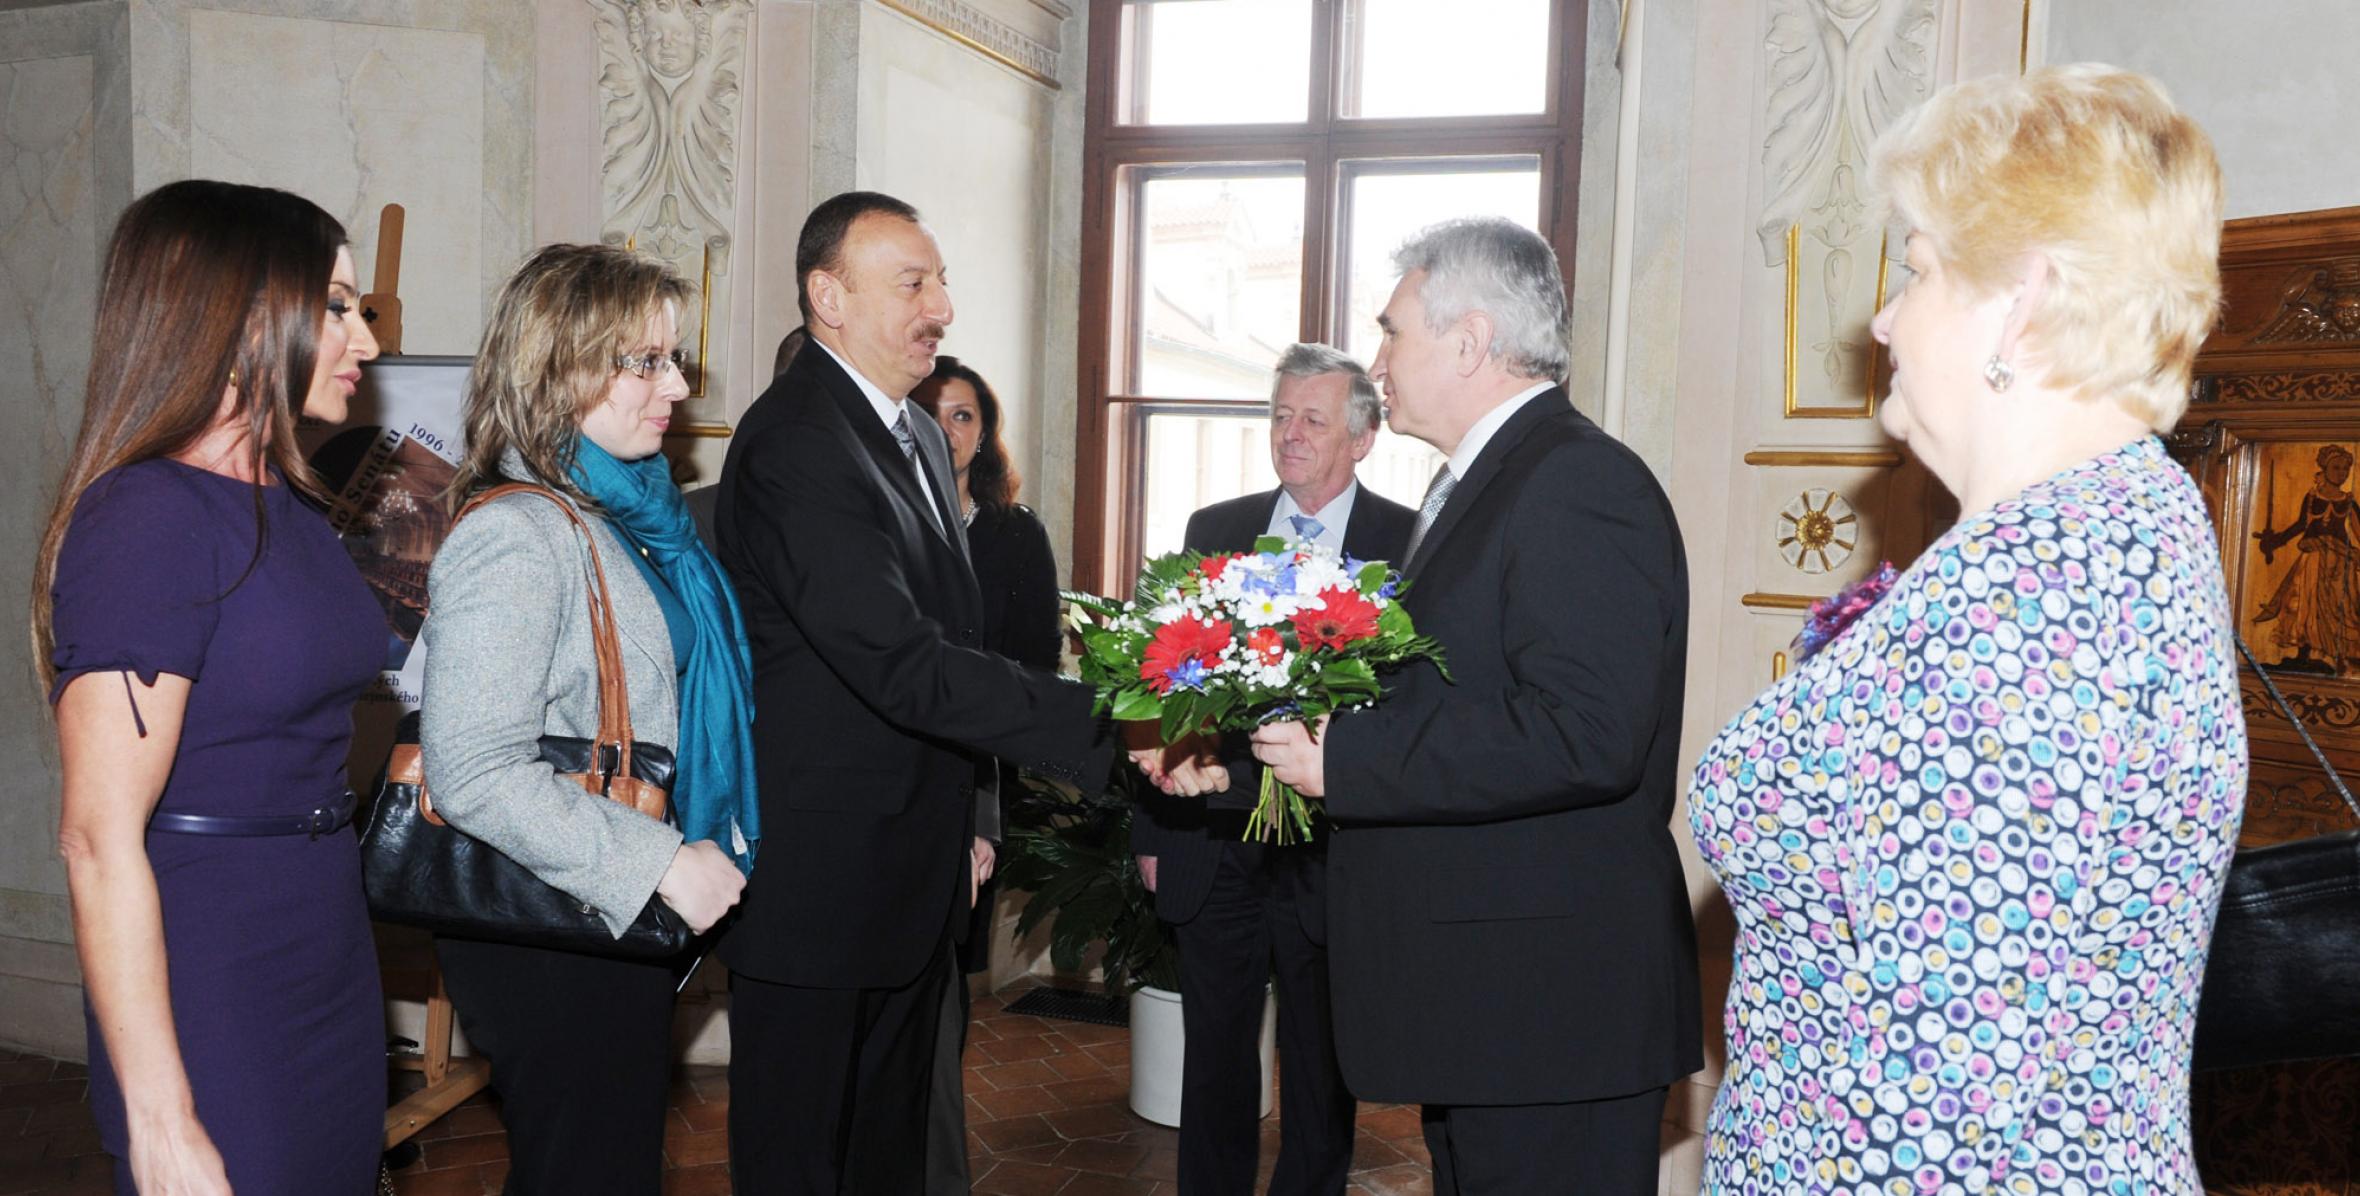 President of the Senate of the Parliament of the Czech Republic Milan Stech hosted a luncheon in honor of Ilham Aliyev